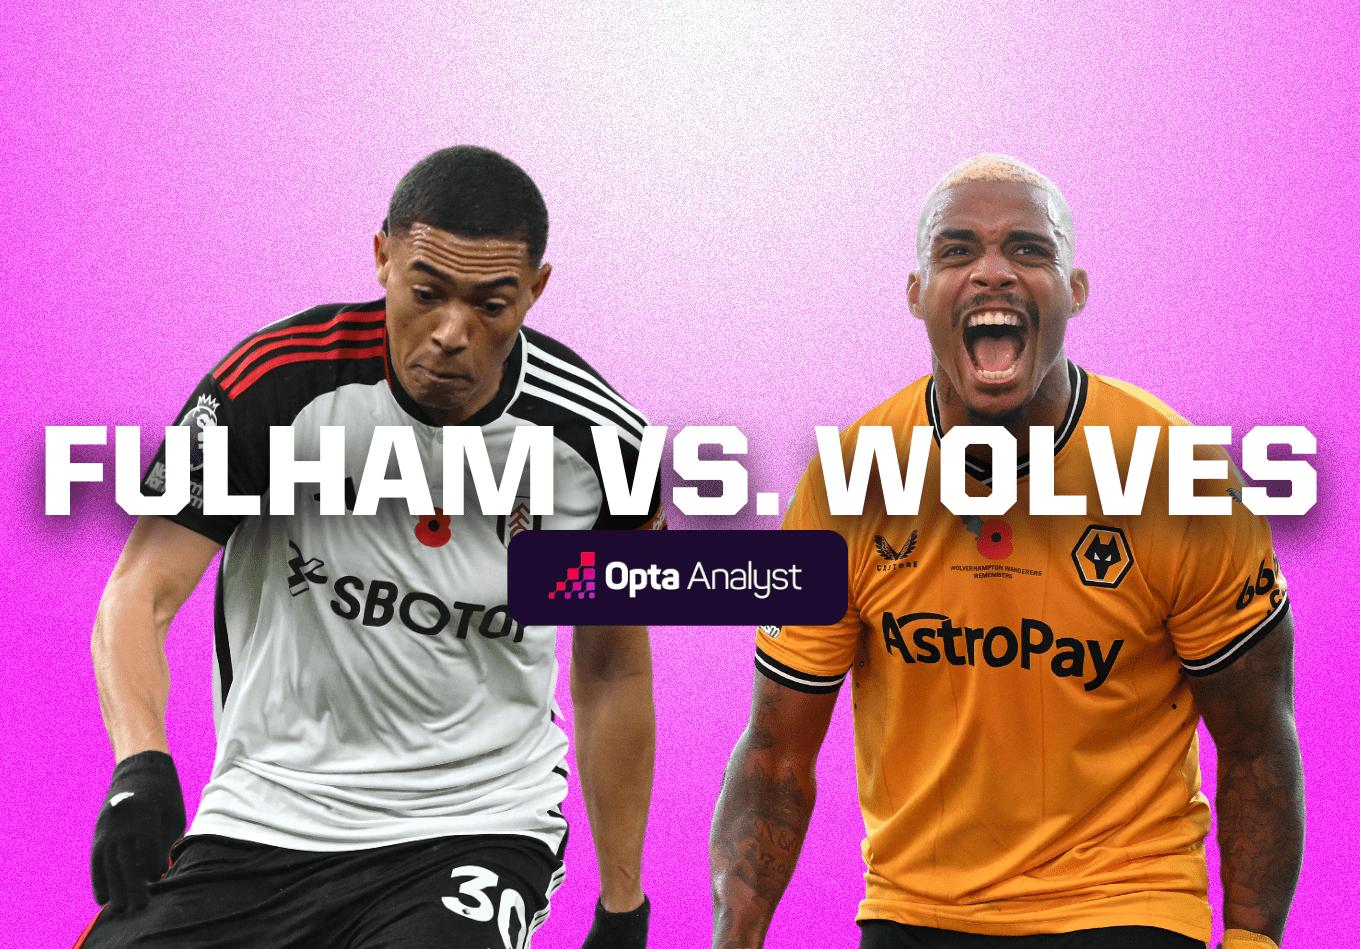 Fulham vs Wolves: Prediction and Preview